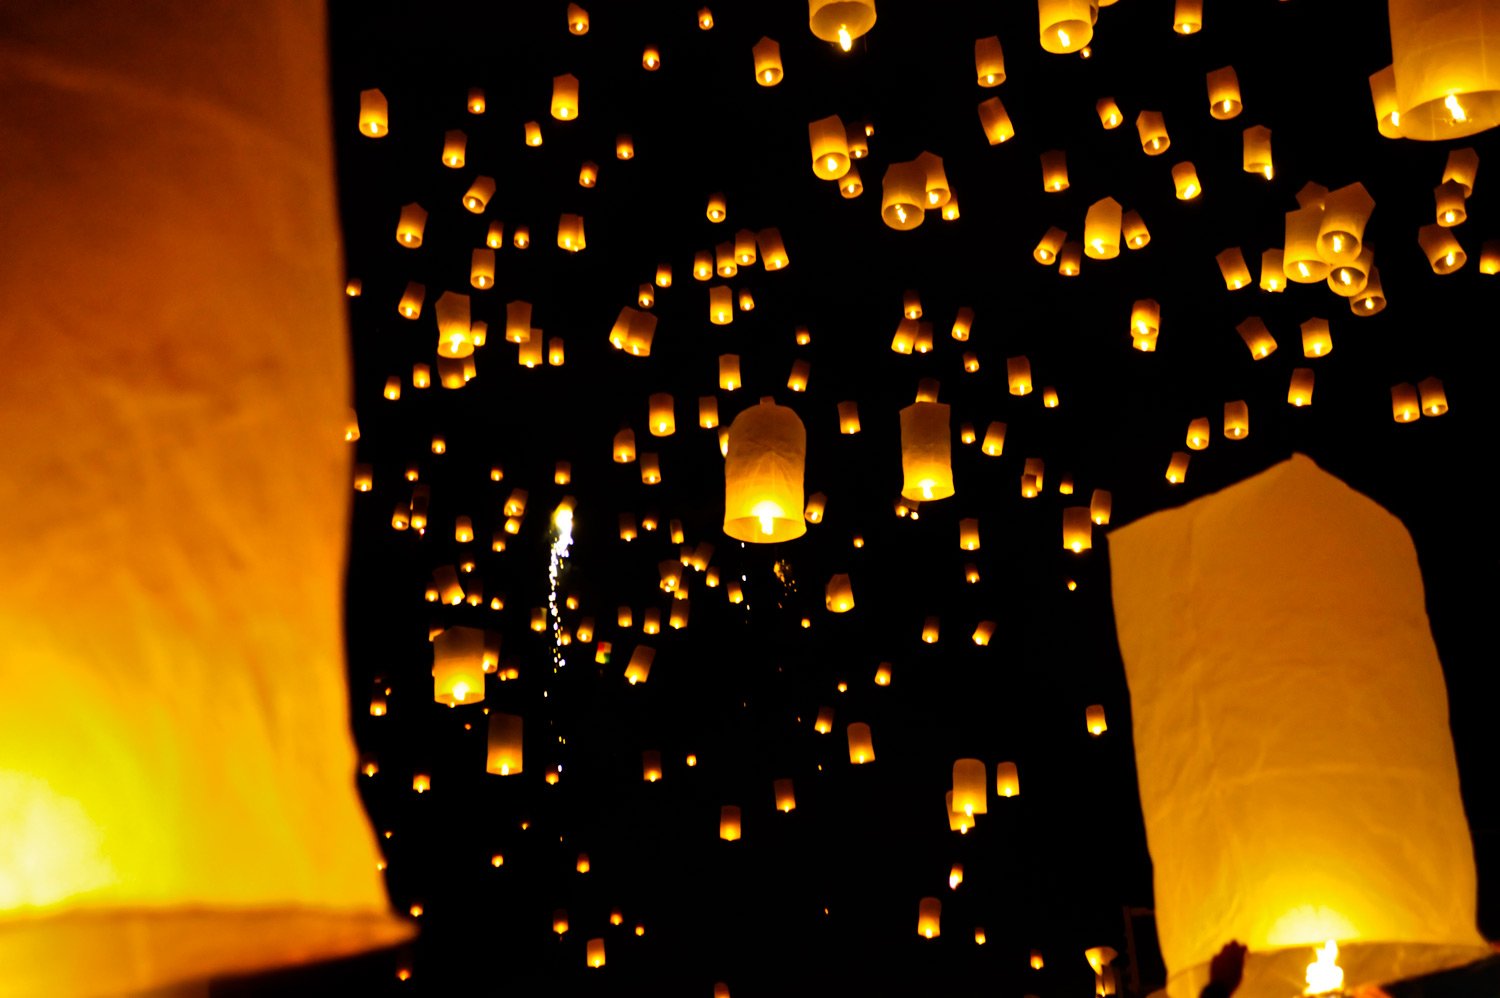 Launching rice paper hot air balloons during the Loi Krathong festival in Chiang Mai, Thailand.